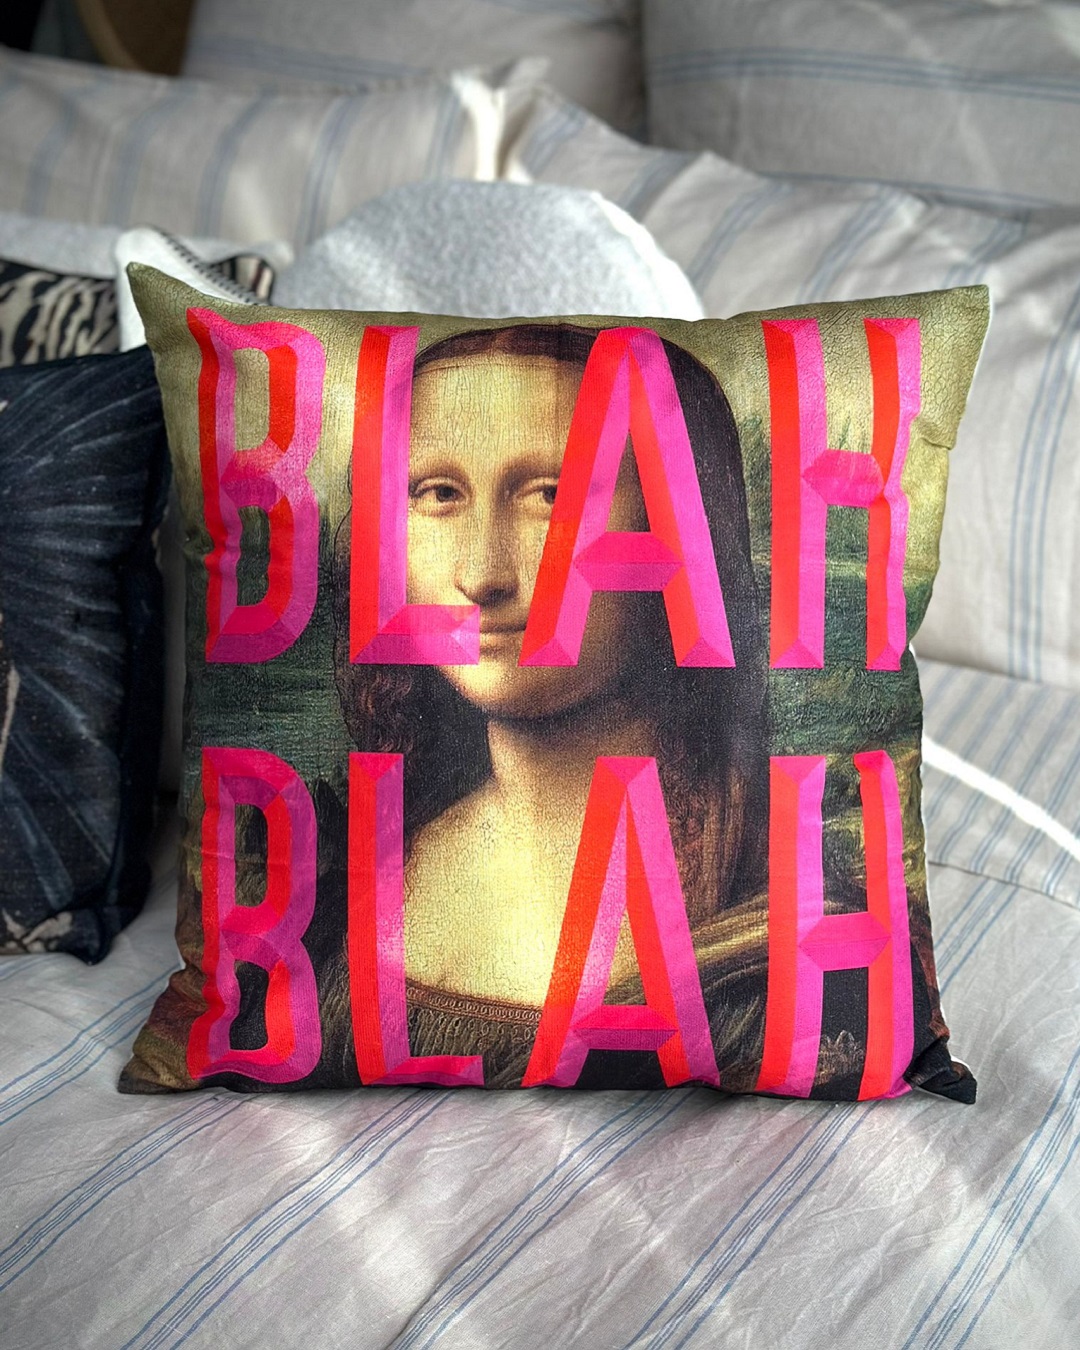 painting on square cushion with blah blah on it